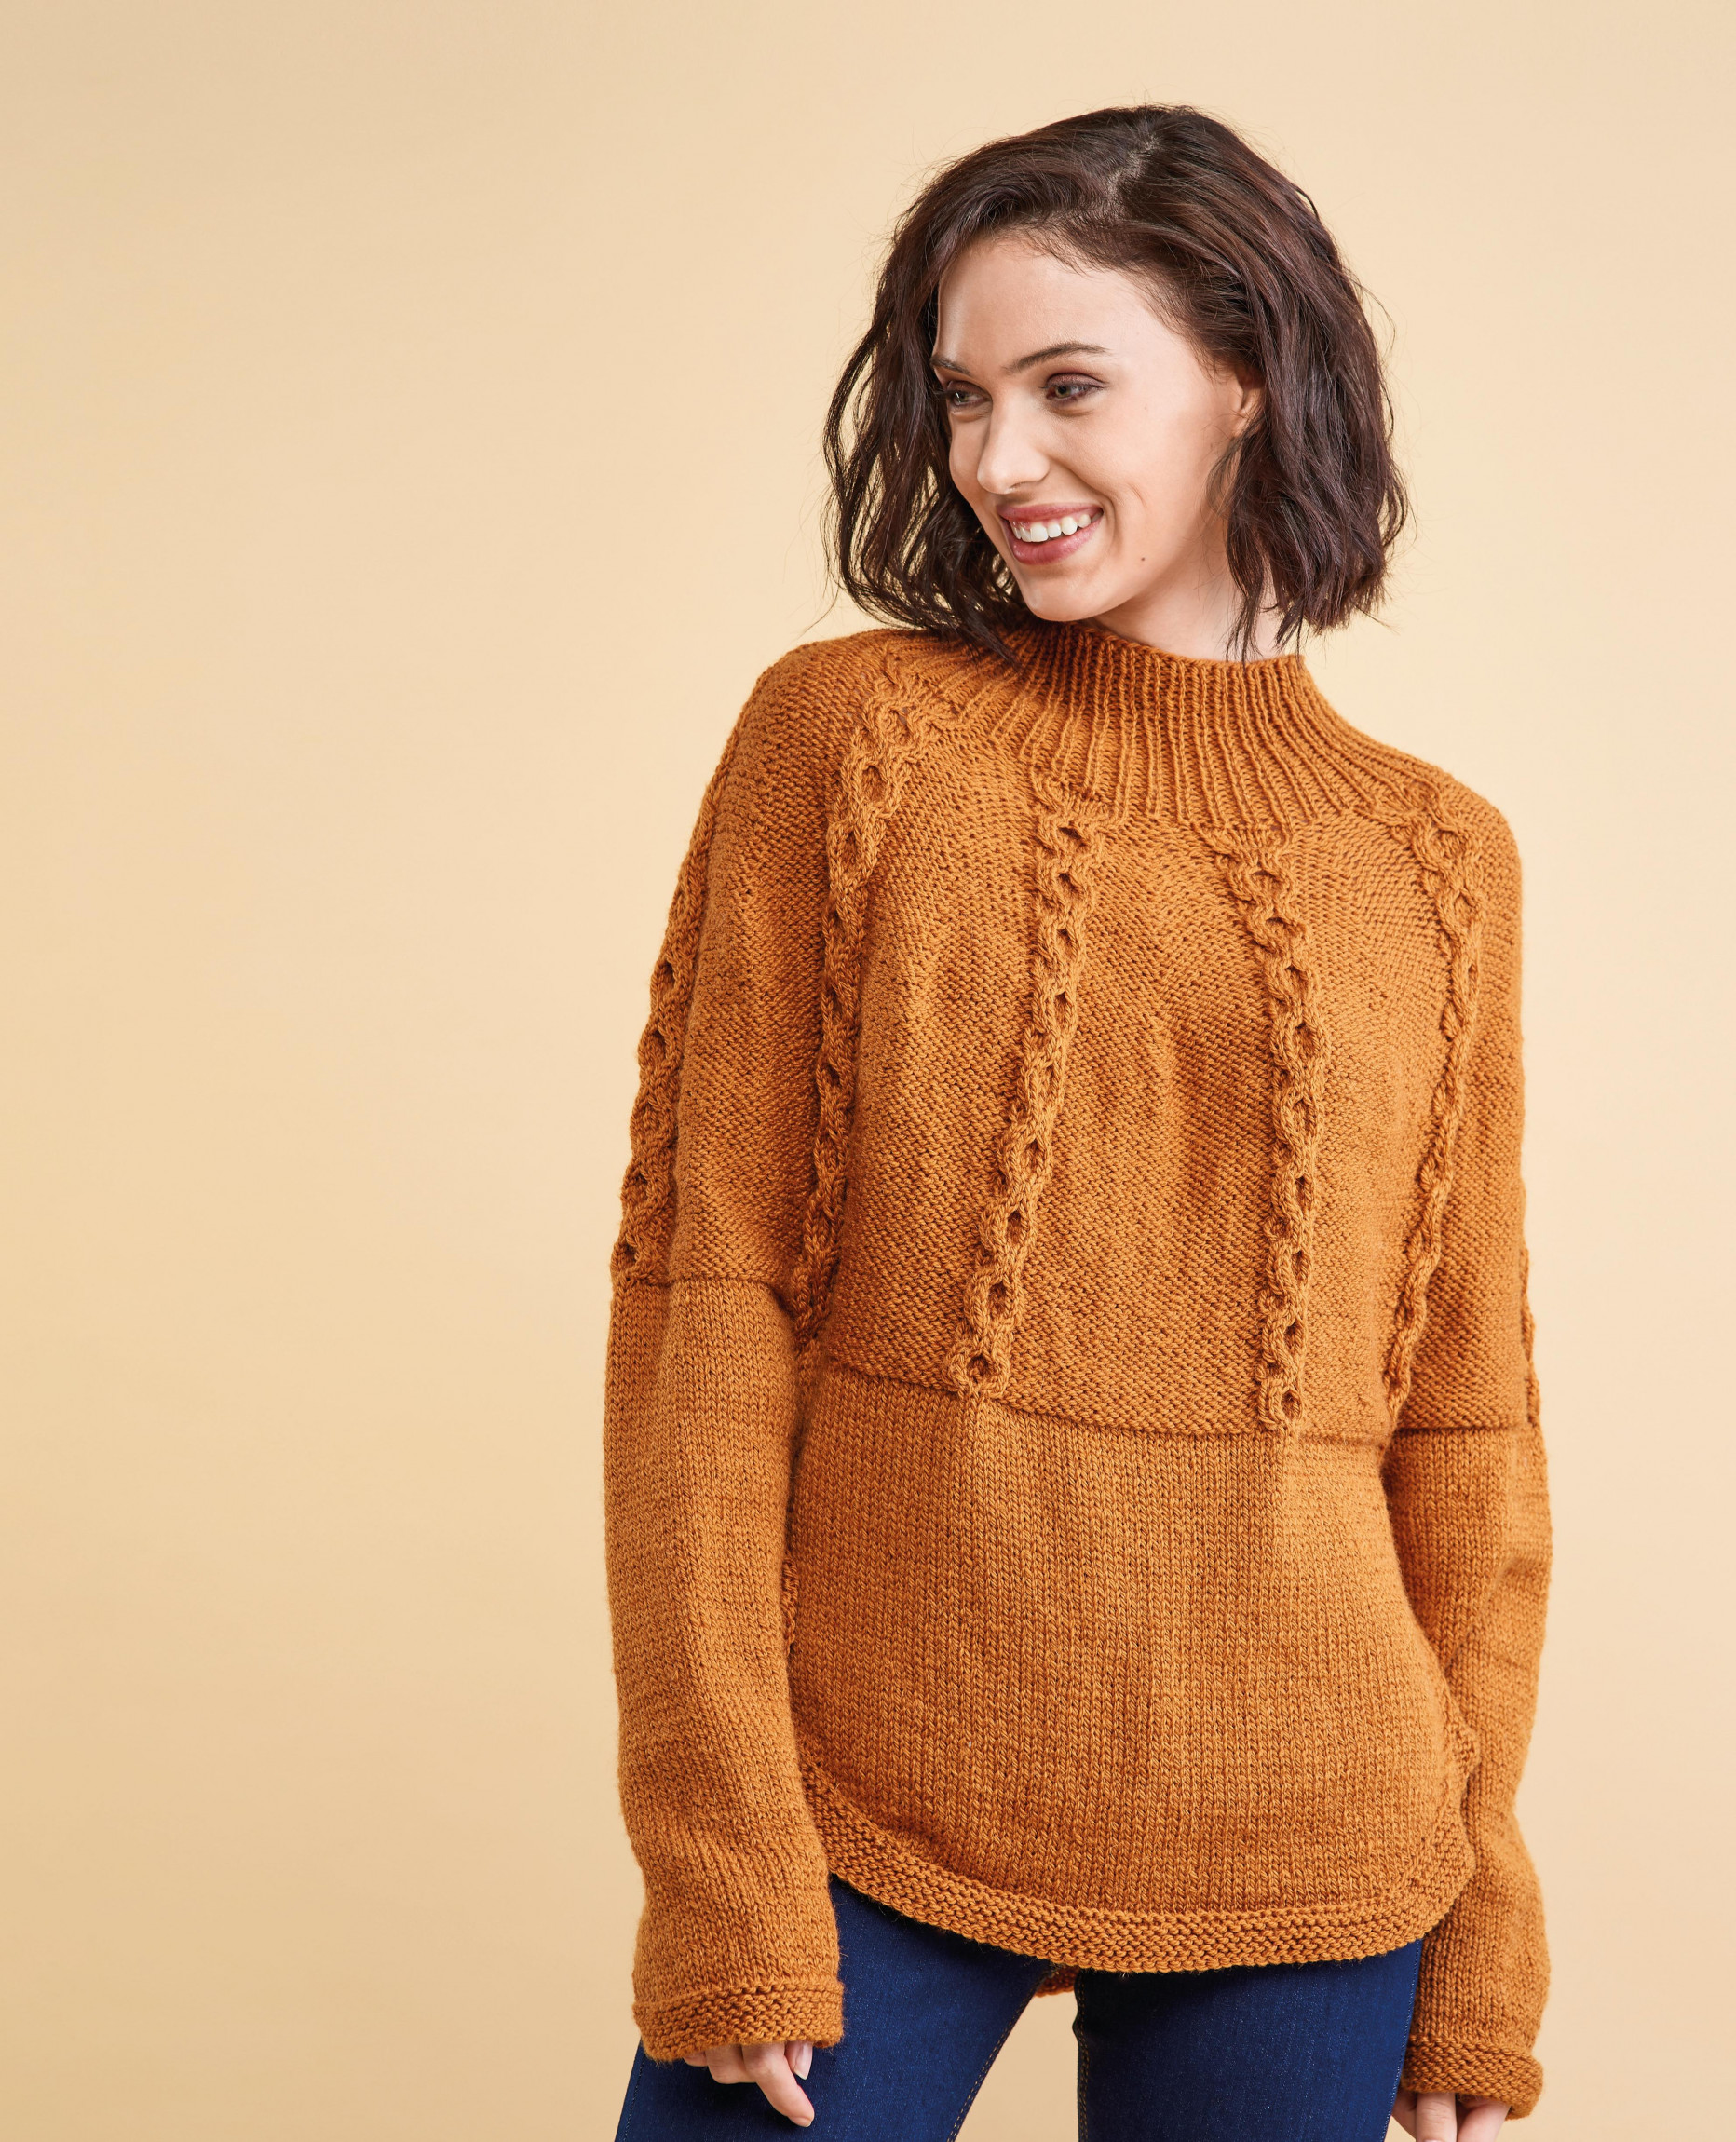 Curved Yoke Cable Sweater | Knitting Patterns | Let's Knit Magazine